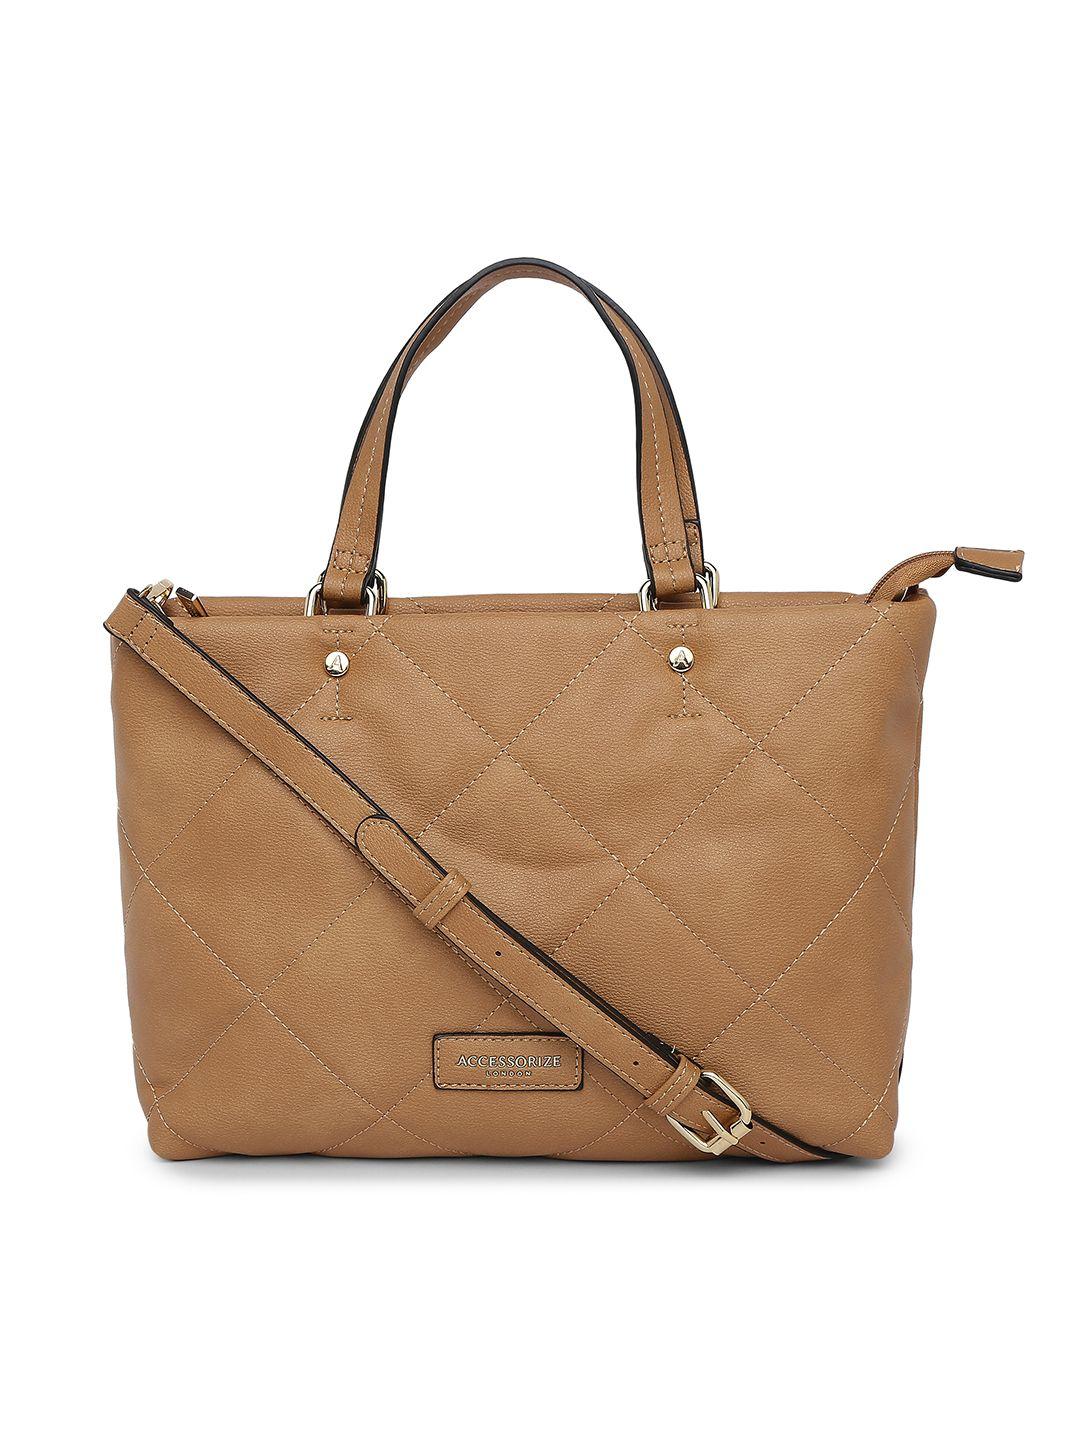 accessorize camel brown structured kayleigh handheld bag with quilted detail